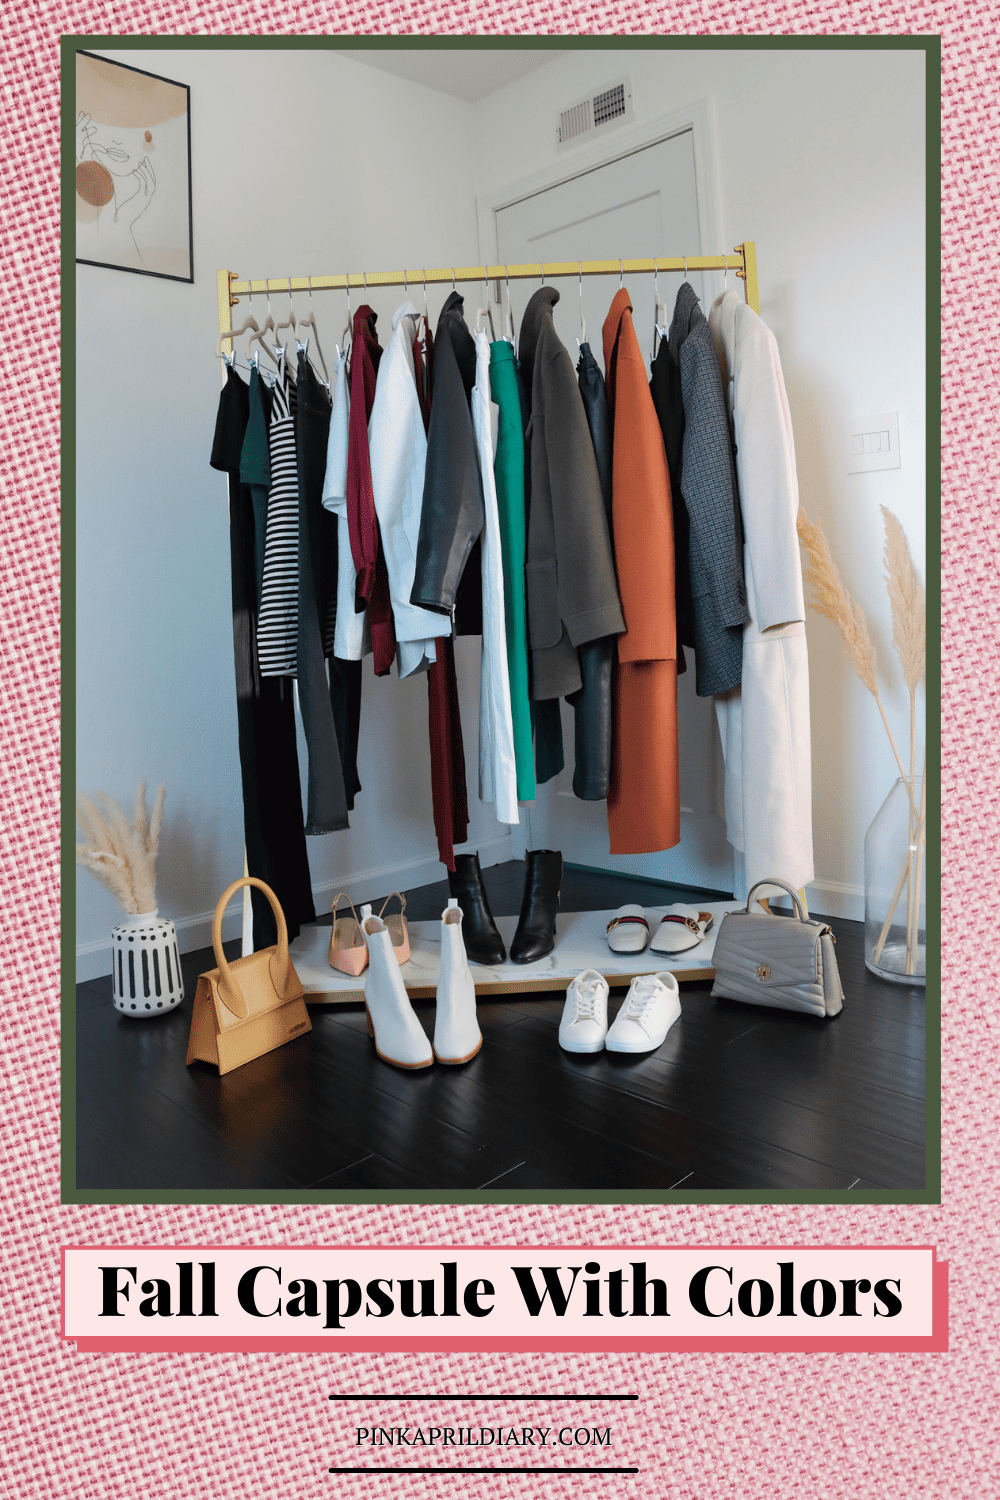 Fall Capsule Wardrobe with Colors